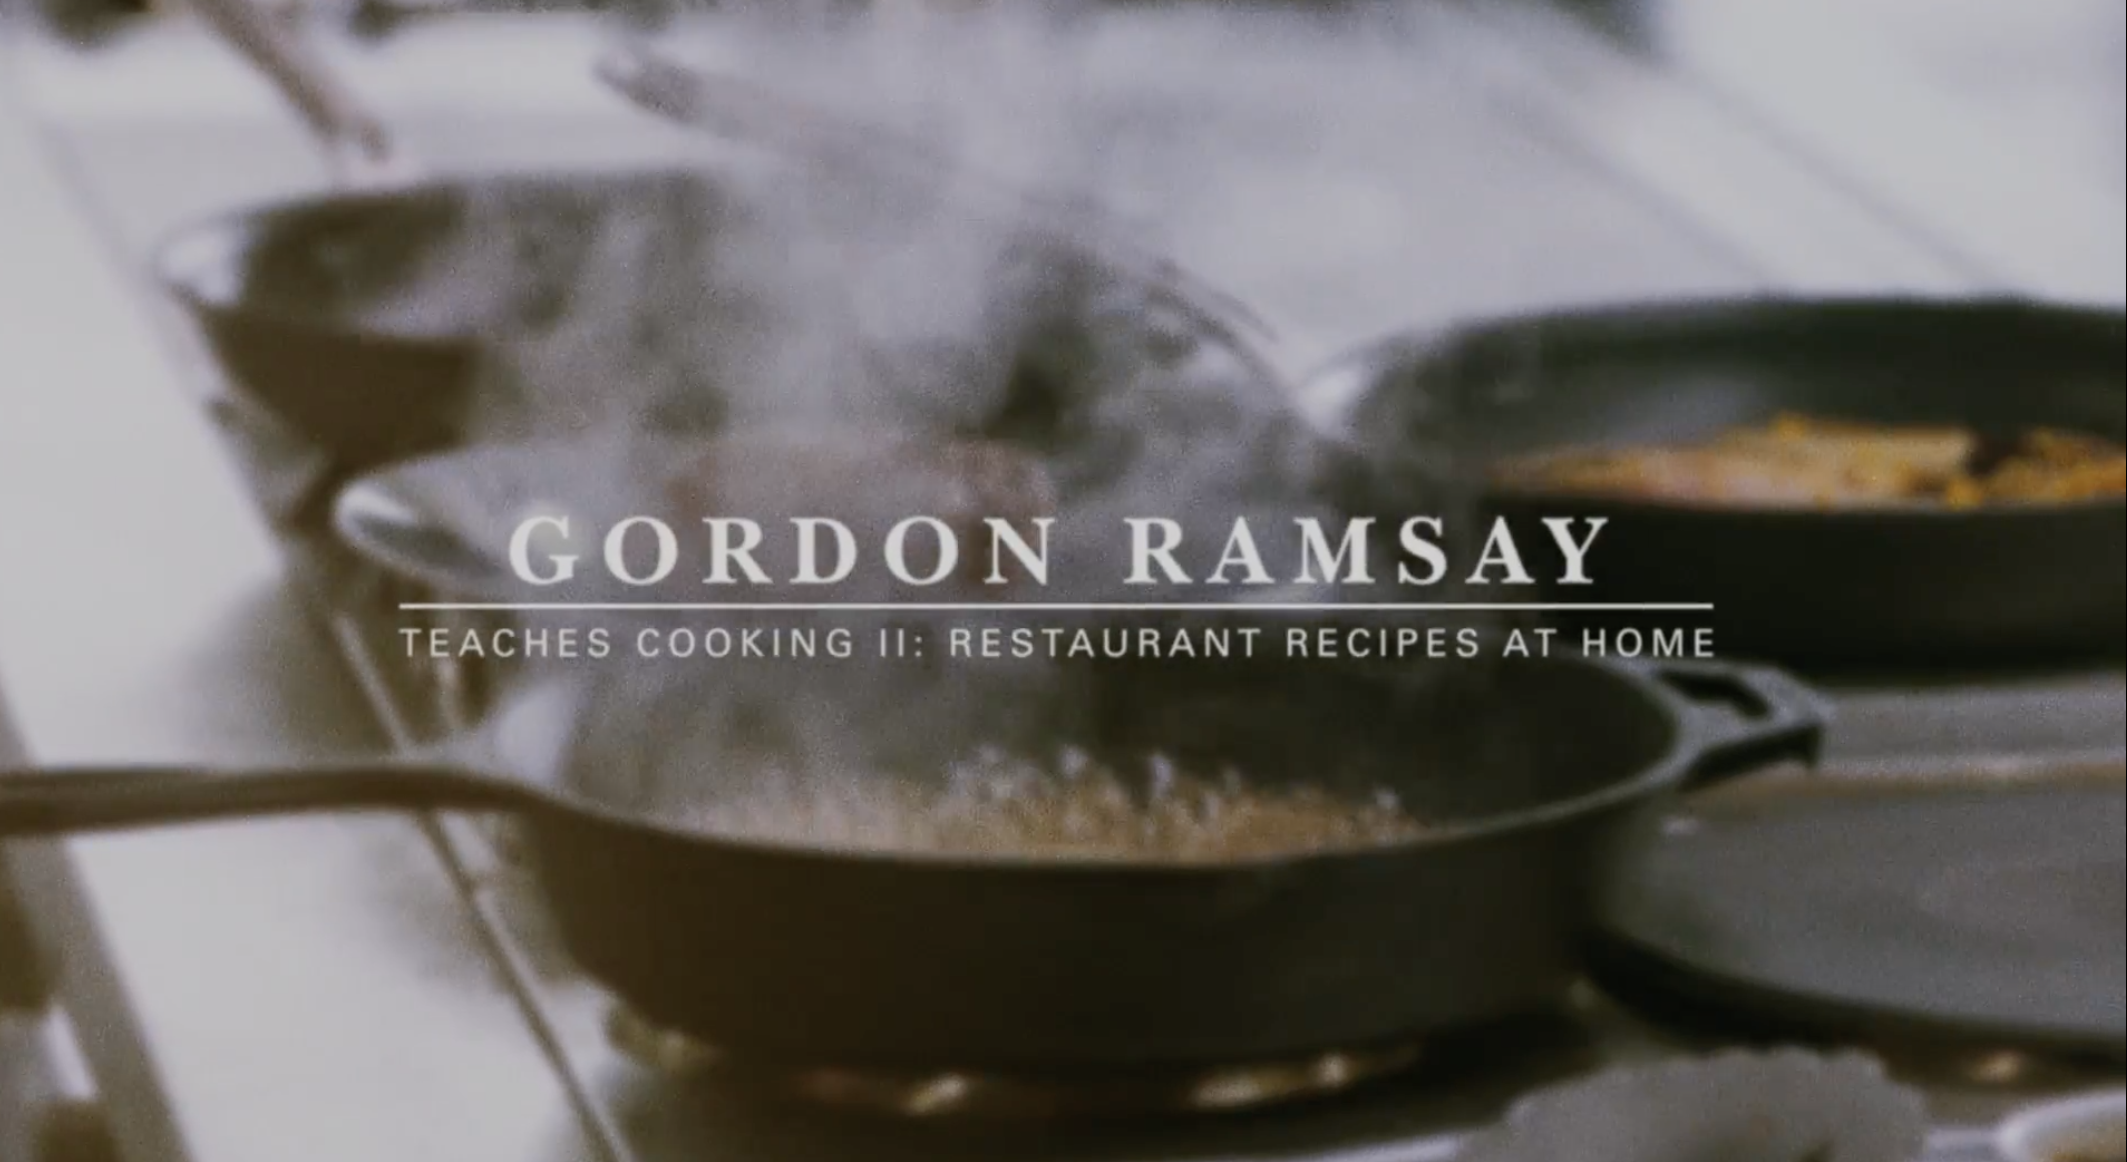 Gordon Teaches Why You Should Cook With Non-Stick Pans